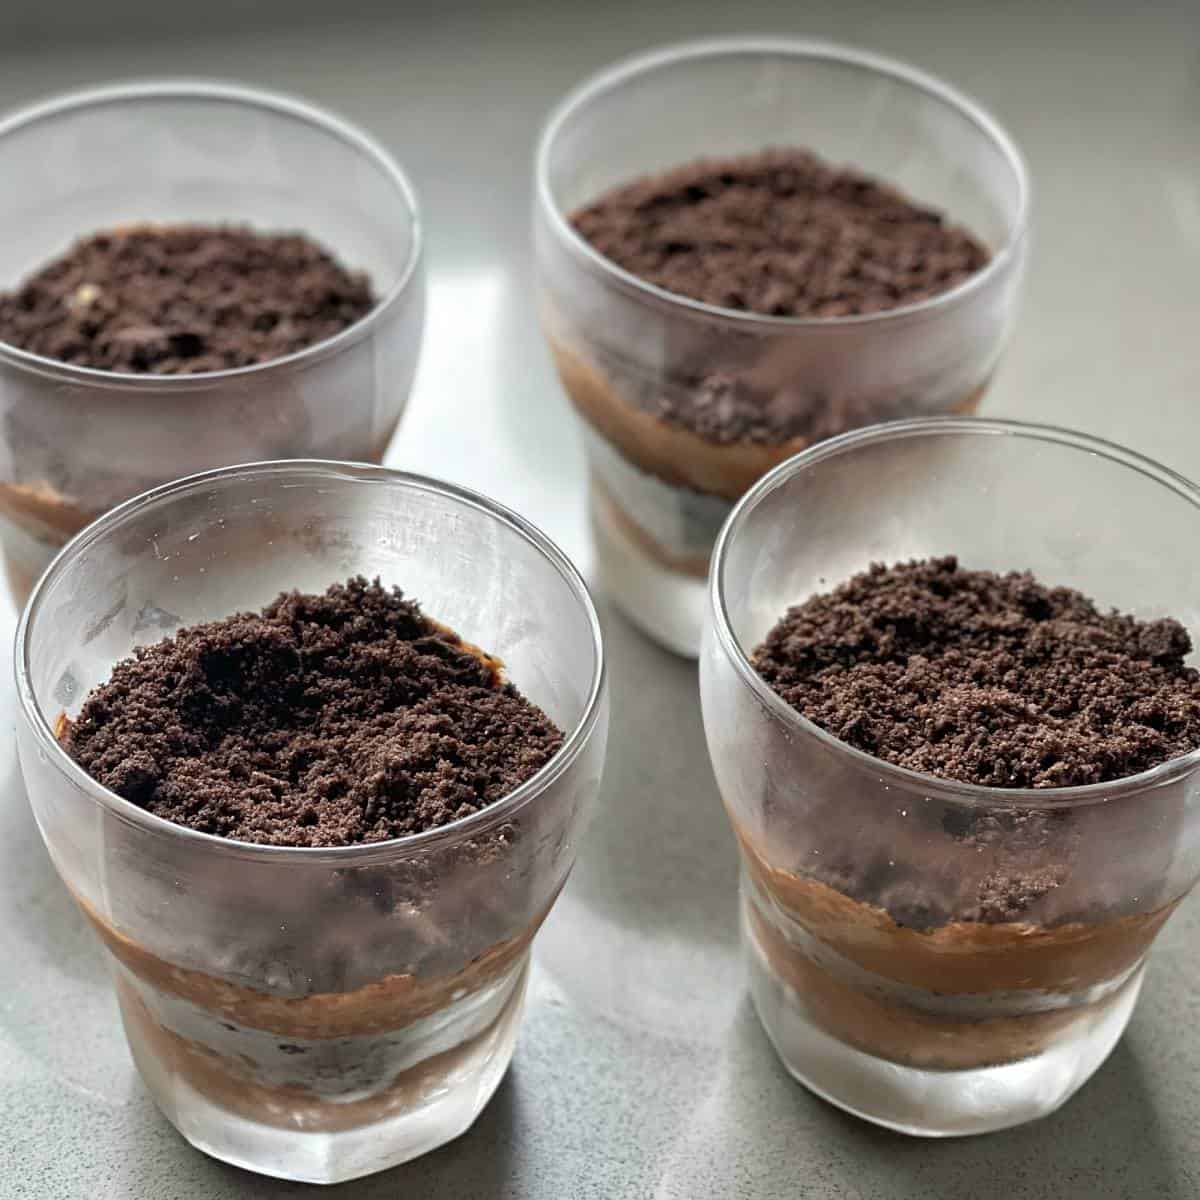 Four Coffee Chocolate Parfaits assembled about to be put in the fridge to set.